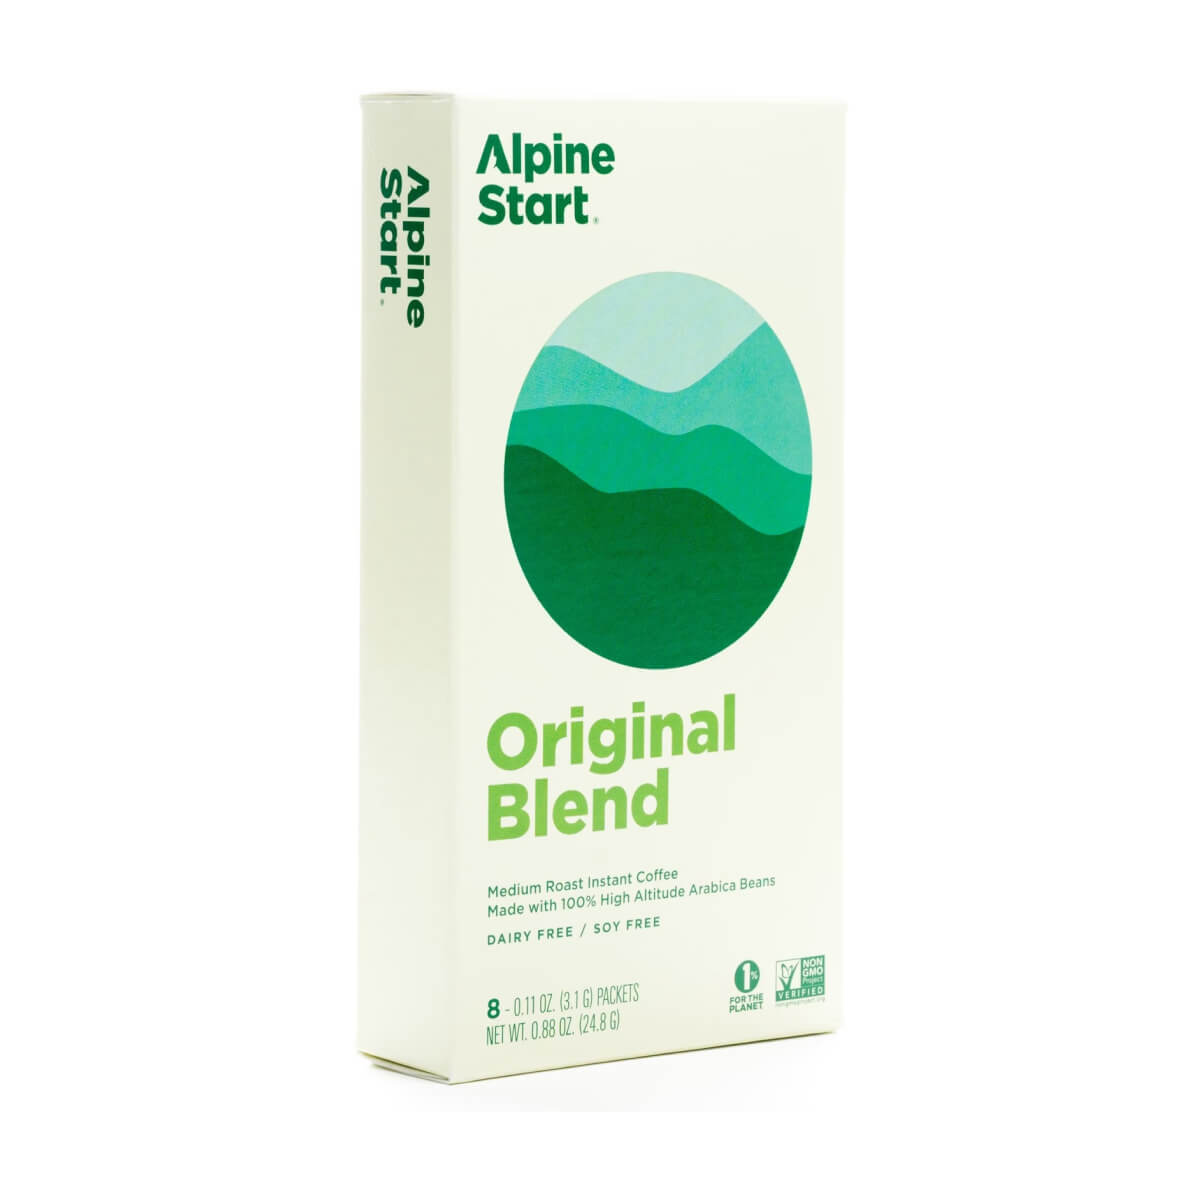 Alpine Start Instant Coffee as a gift idea